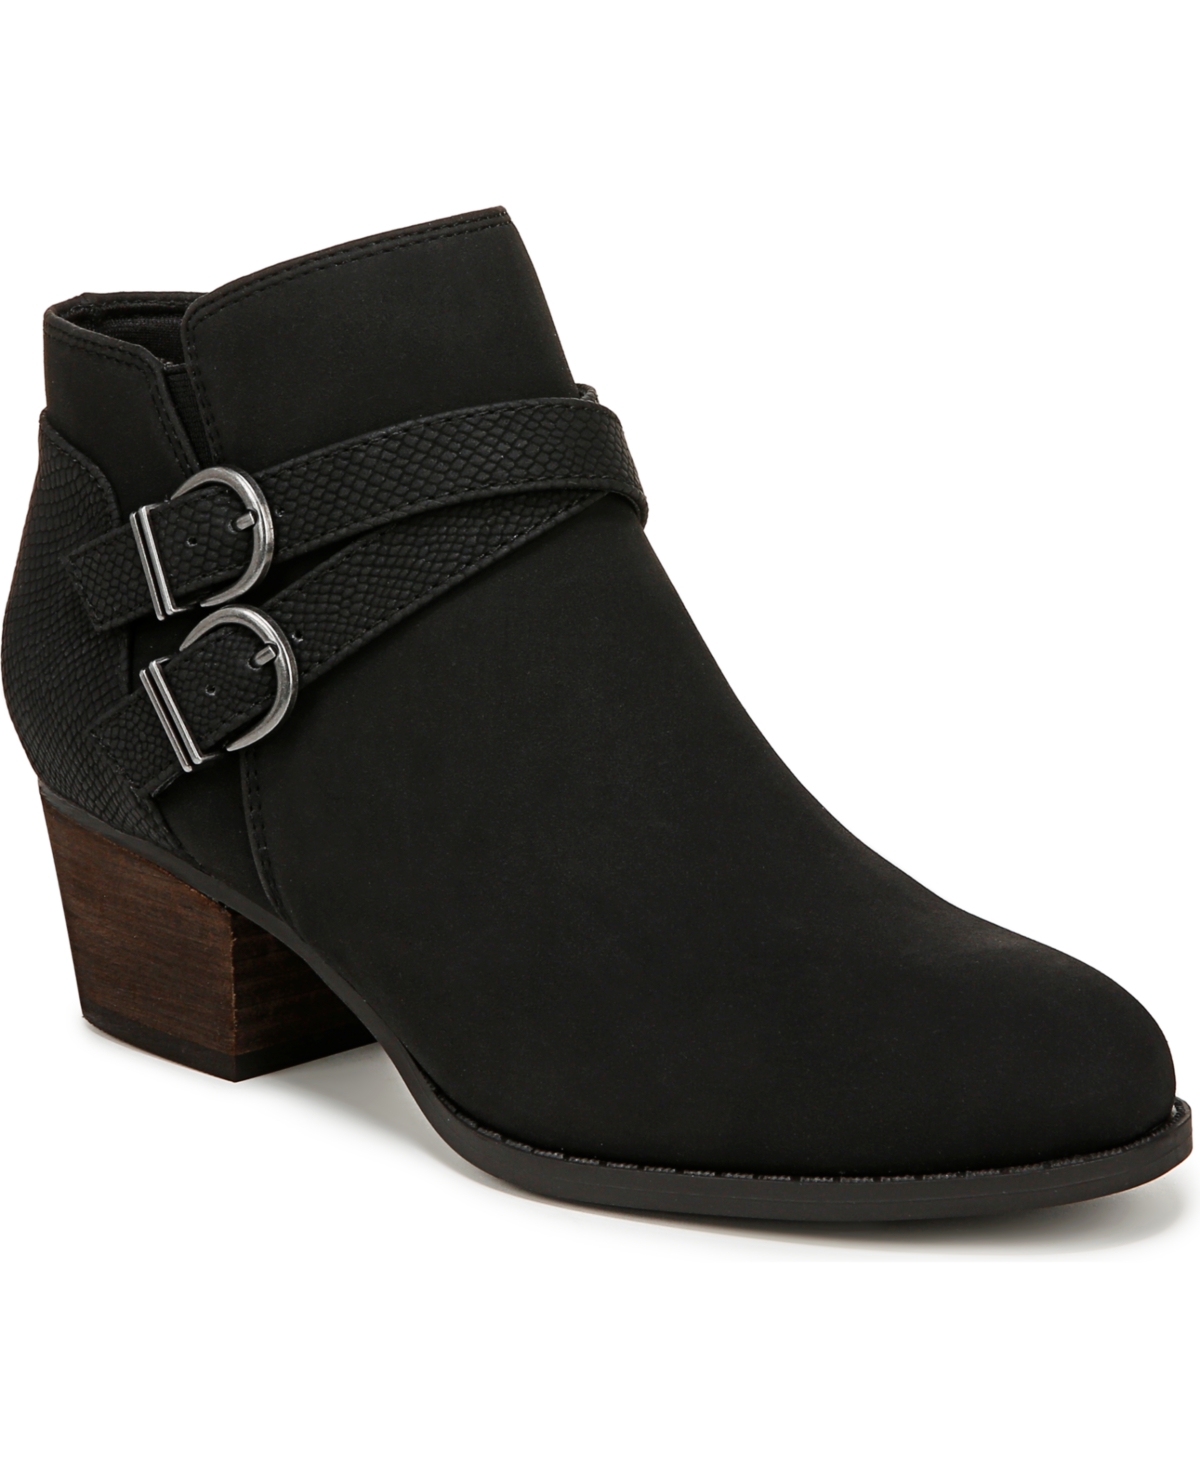 Blaire Western Booties - Black Faux Leather